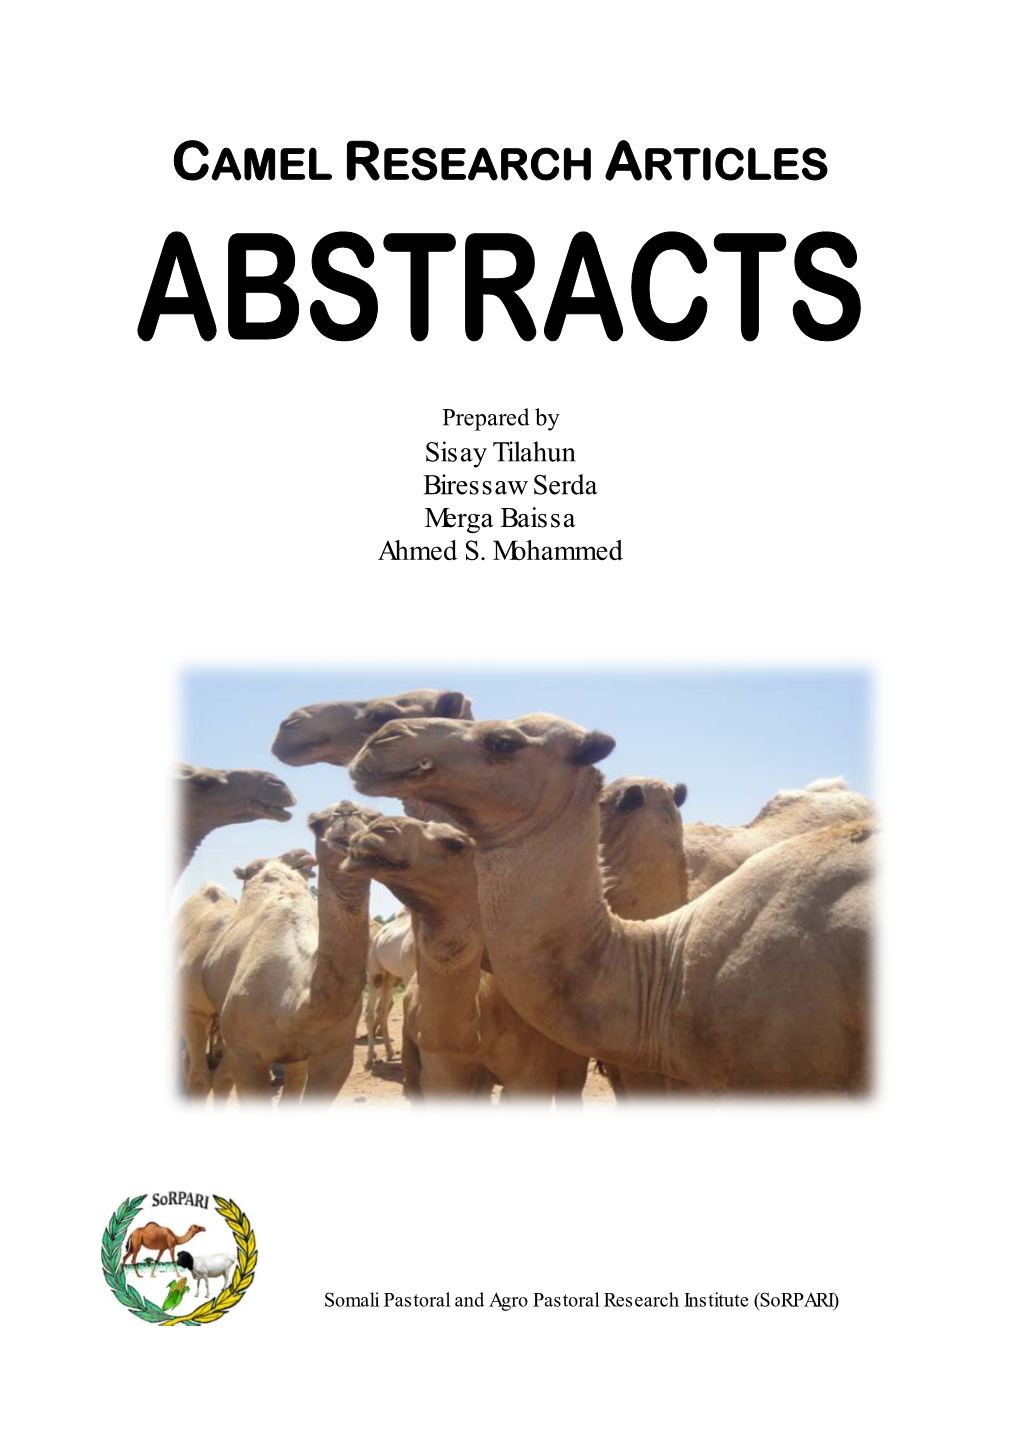 Camel Research Articles Abstracts